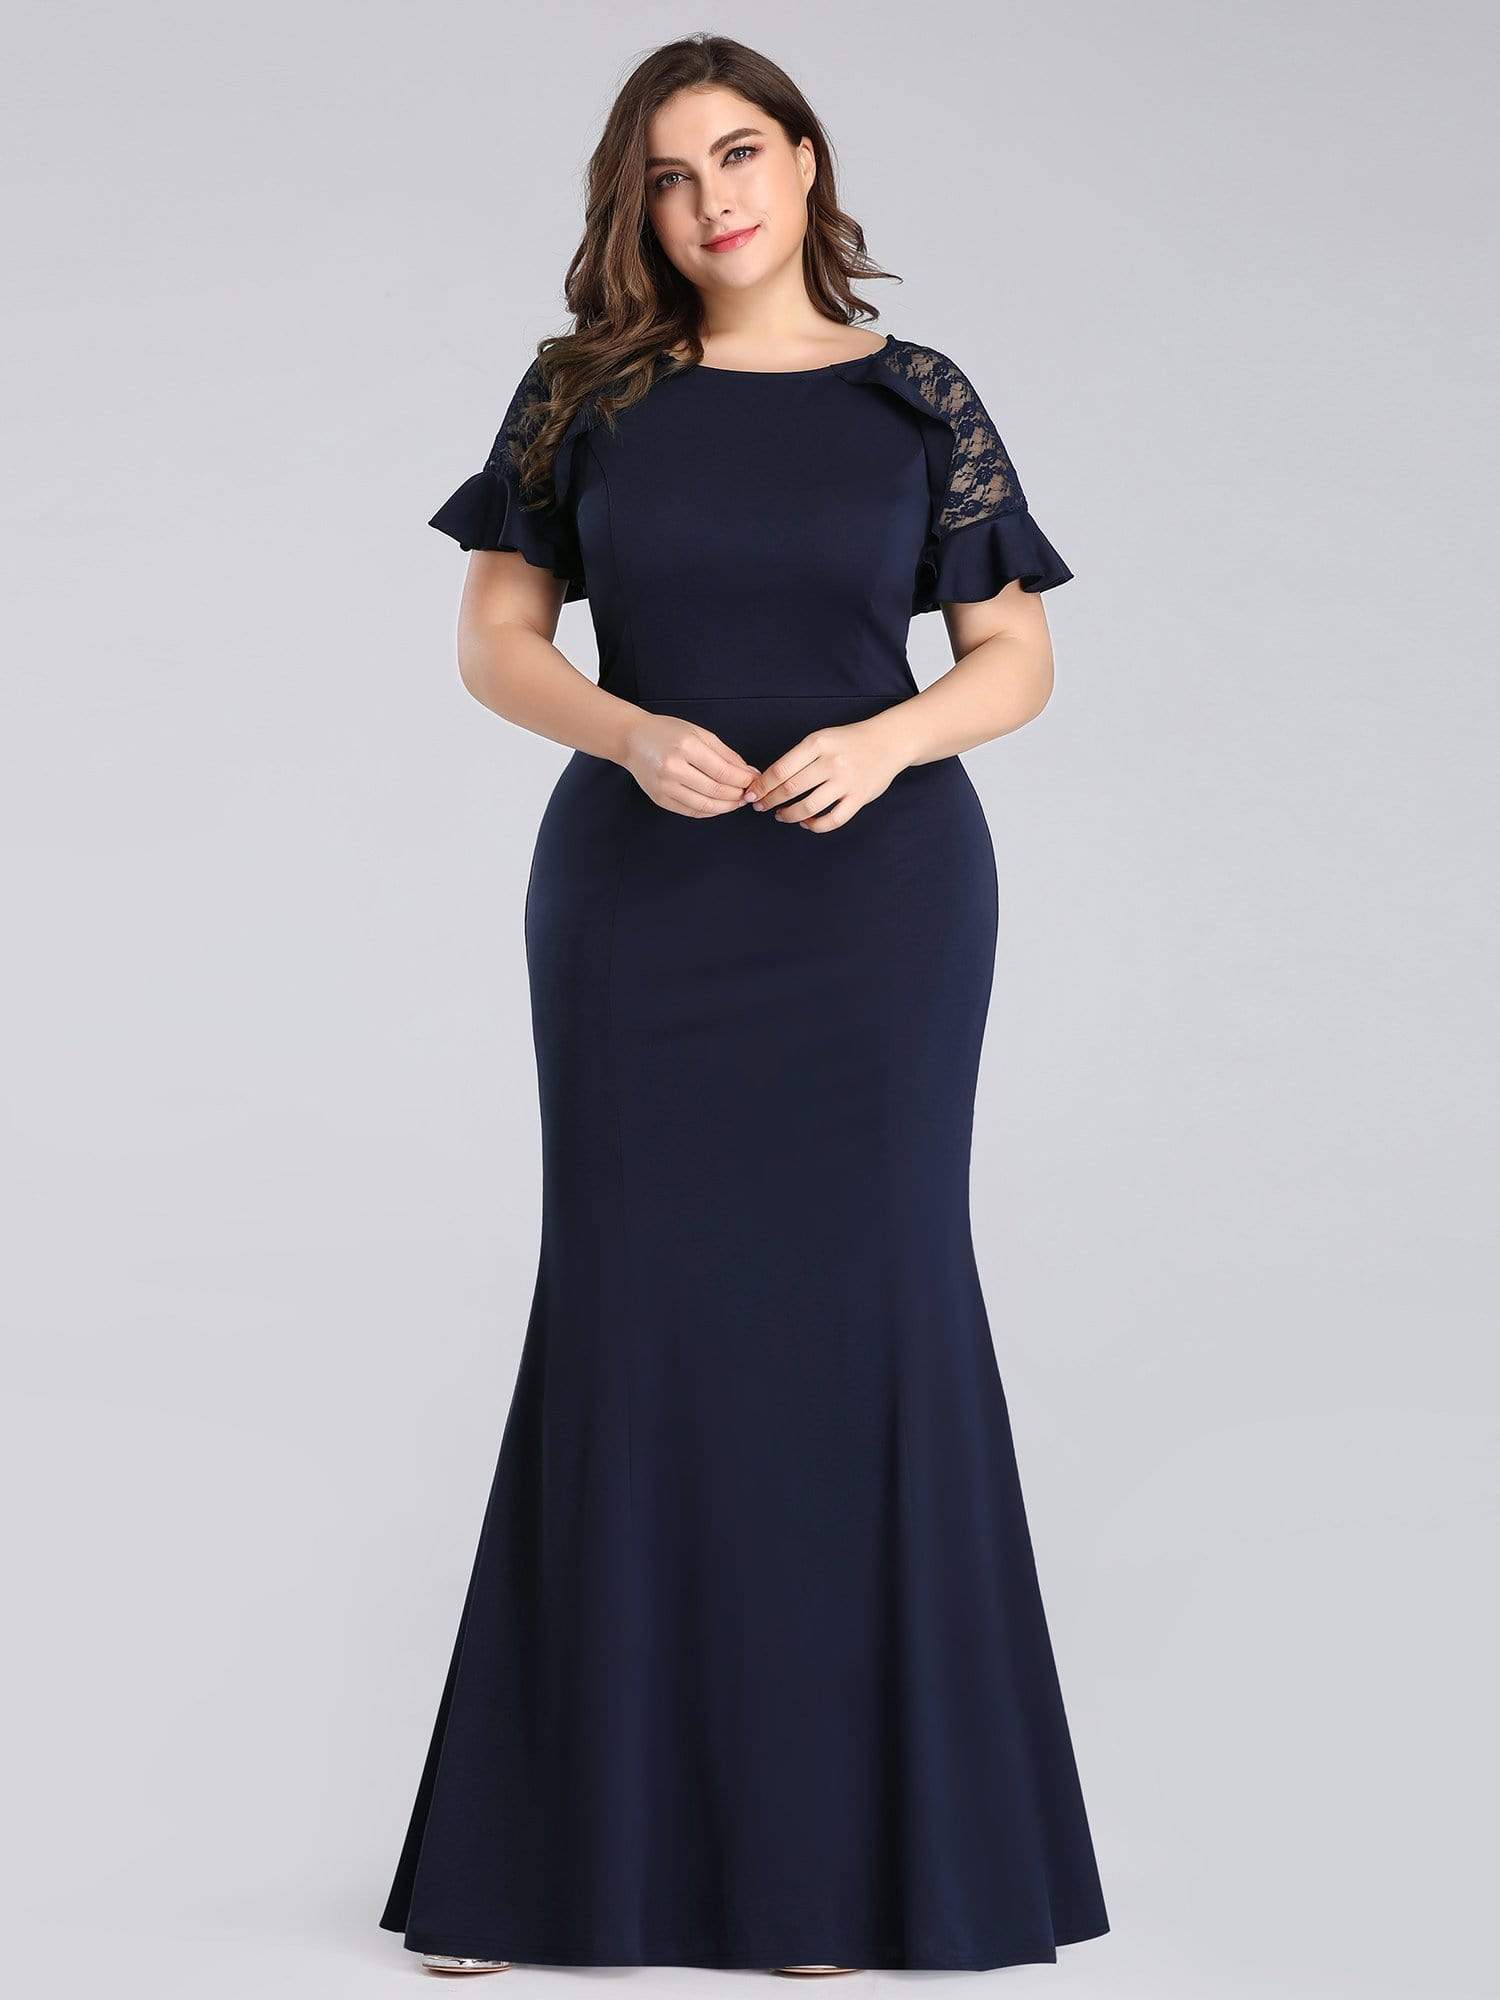 Plus Size Mermaid Wedding Guest Dresses for Women with Short Sleeve